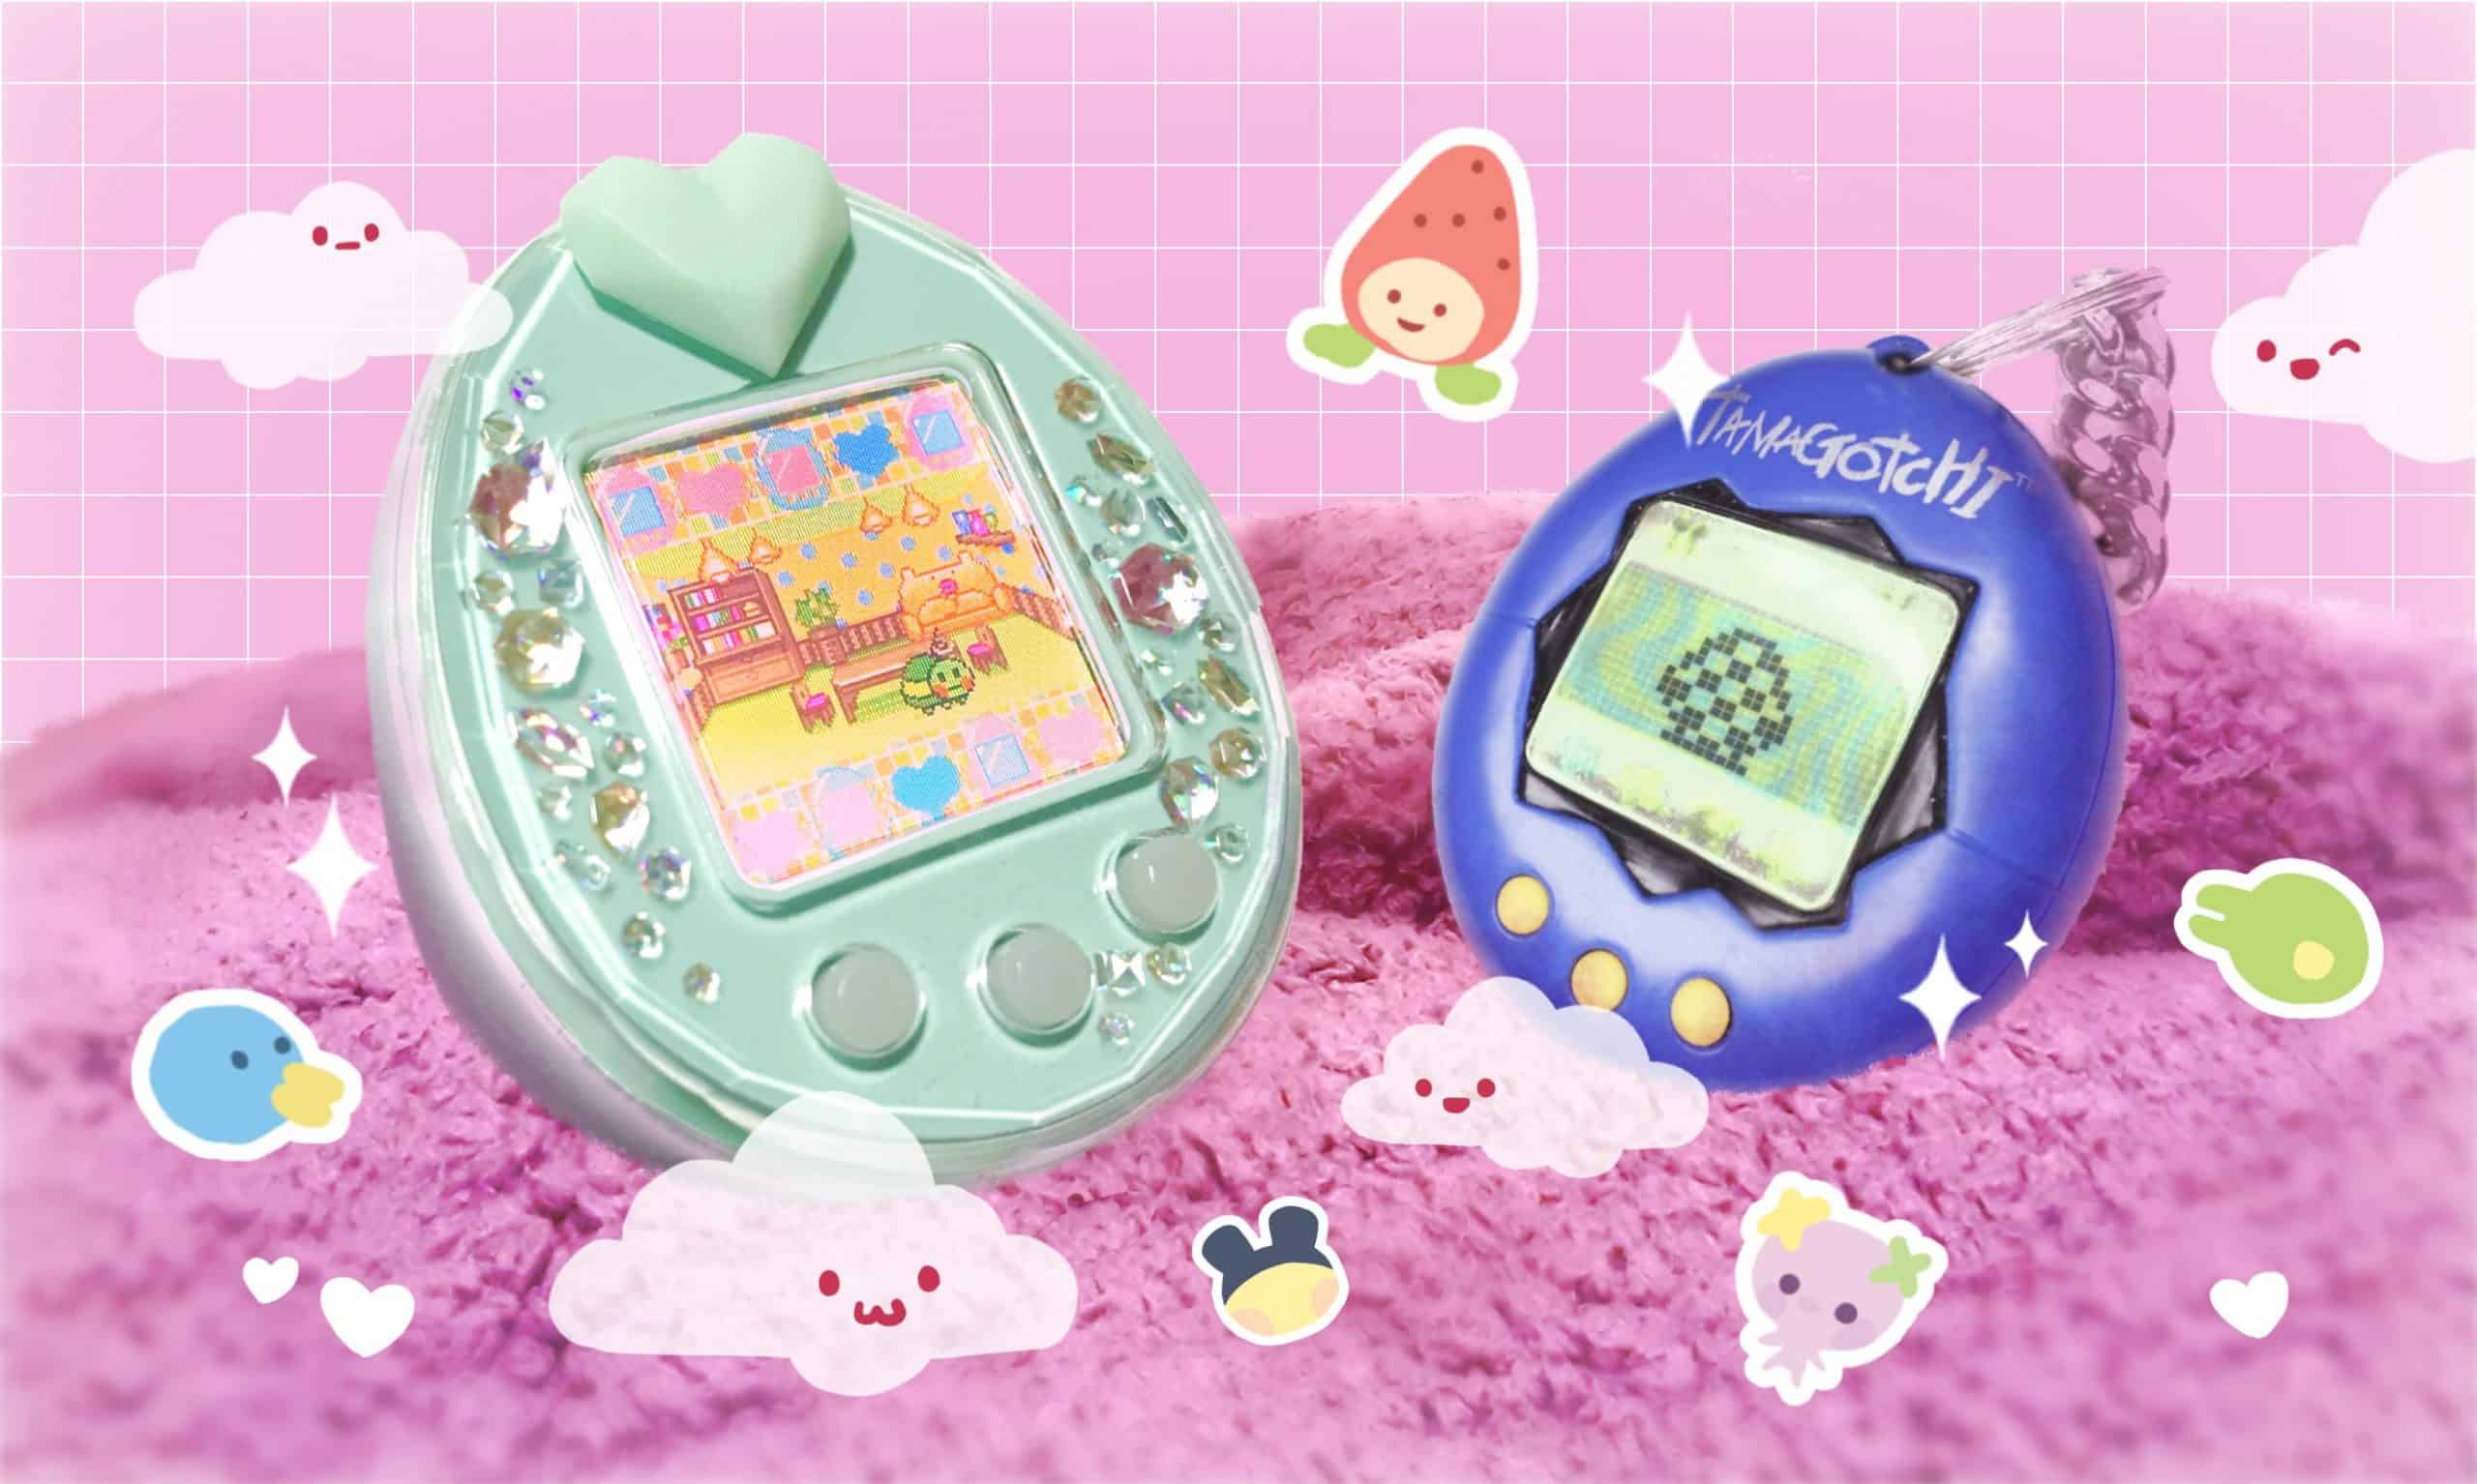 Is a Tamagotchi, and Why Was It So Popular? – 90s Toys